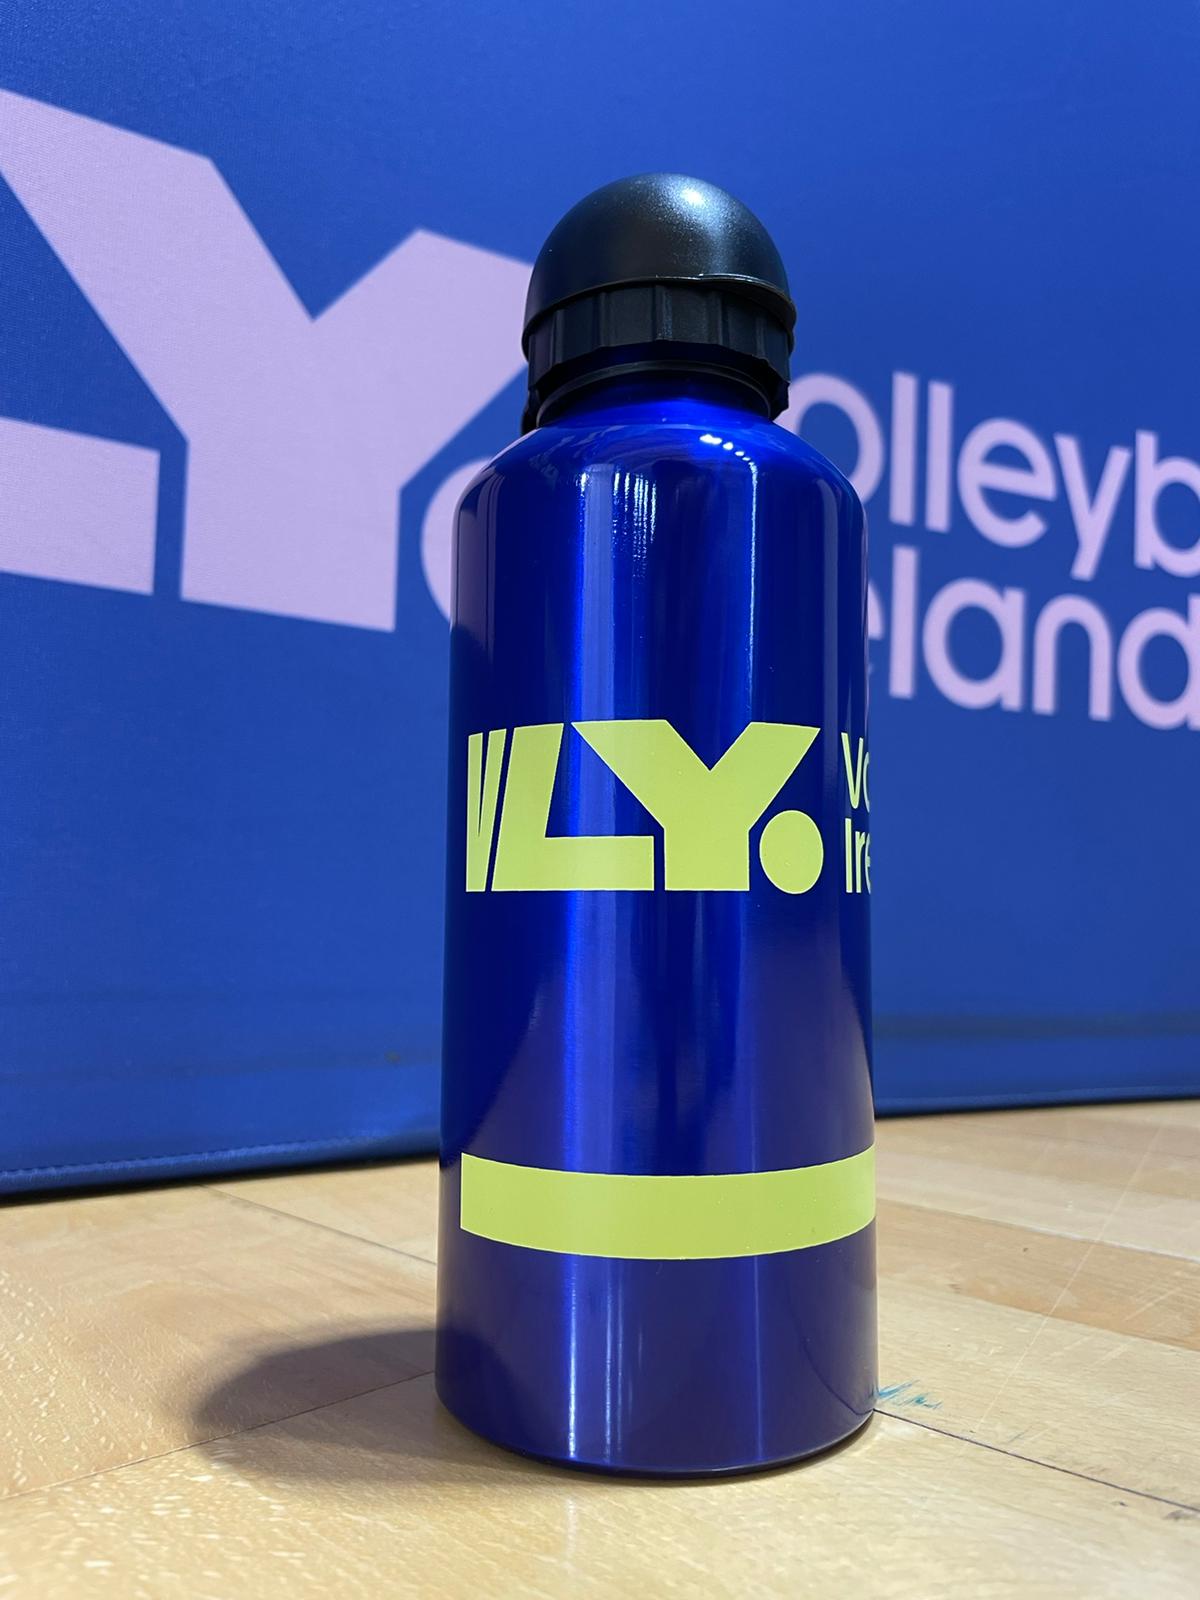 VLY Water Bottle